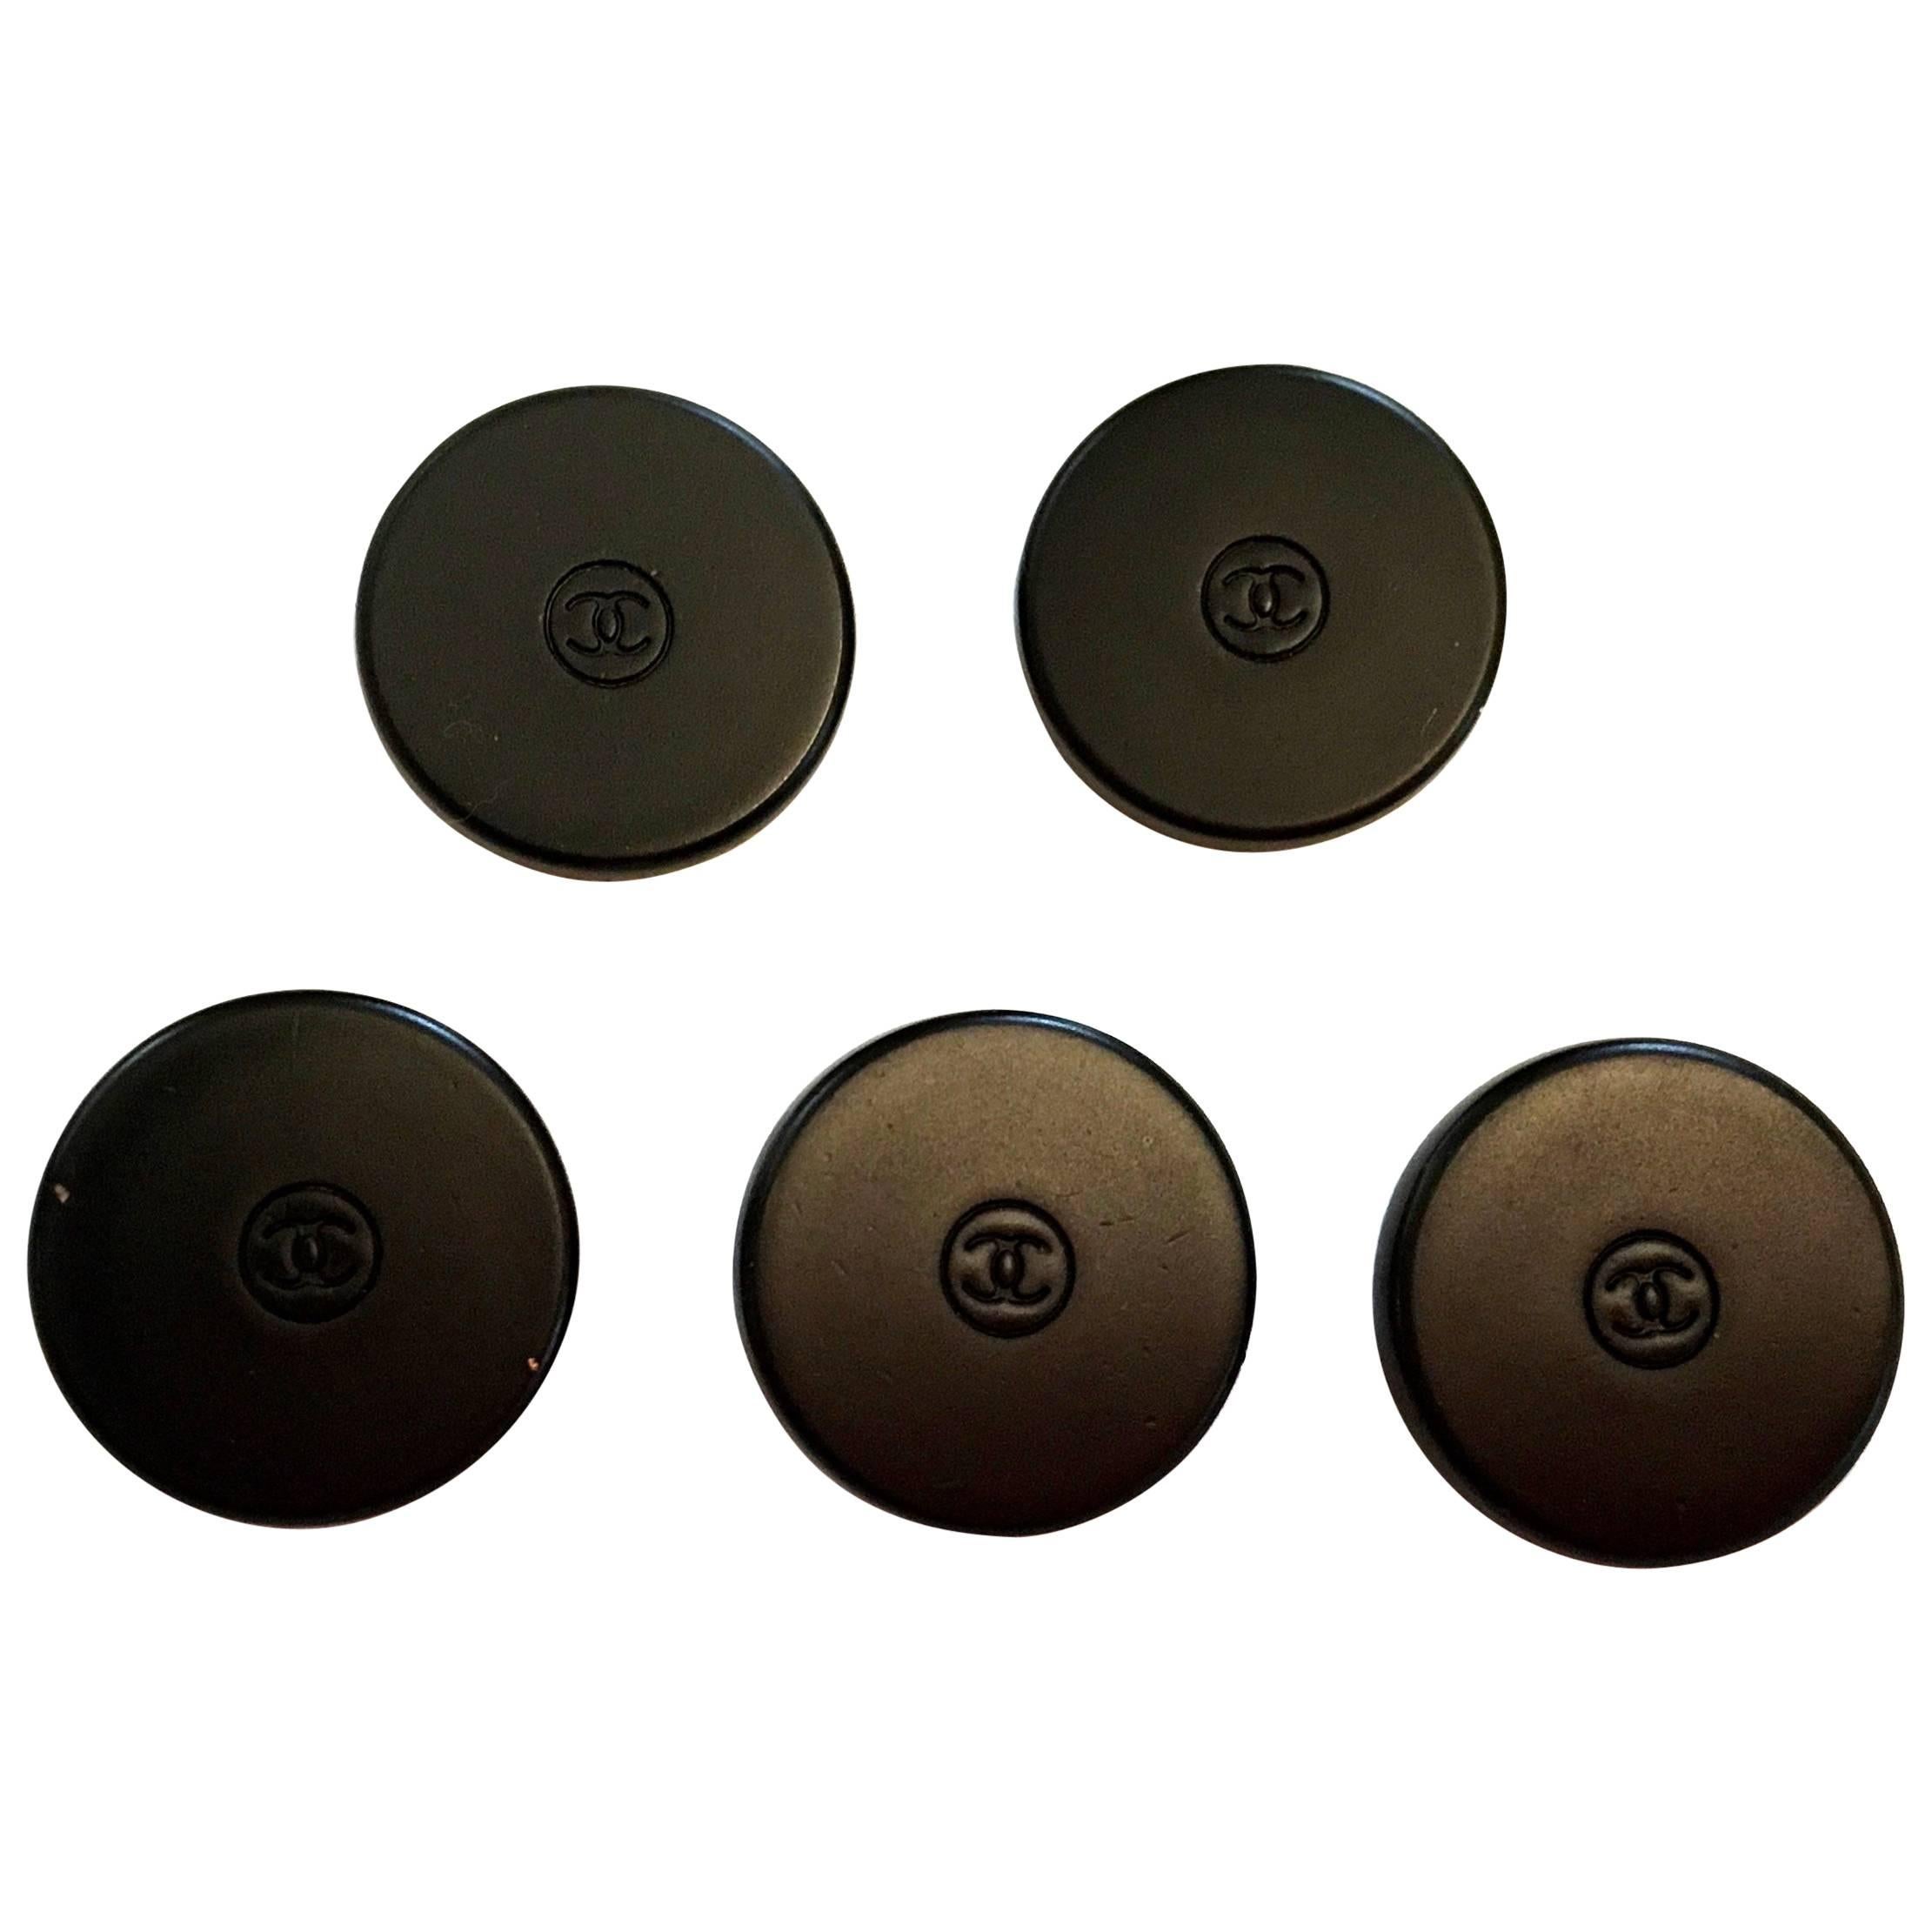 Chanel Buttons - Set of 5 - Black Metal - CC Logo For Sale